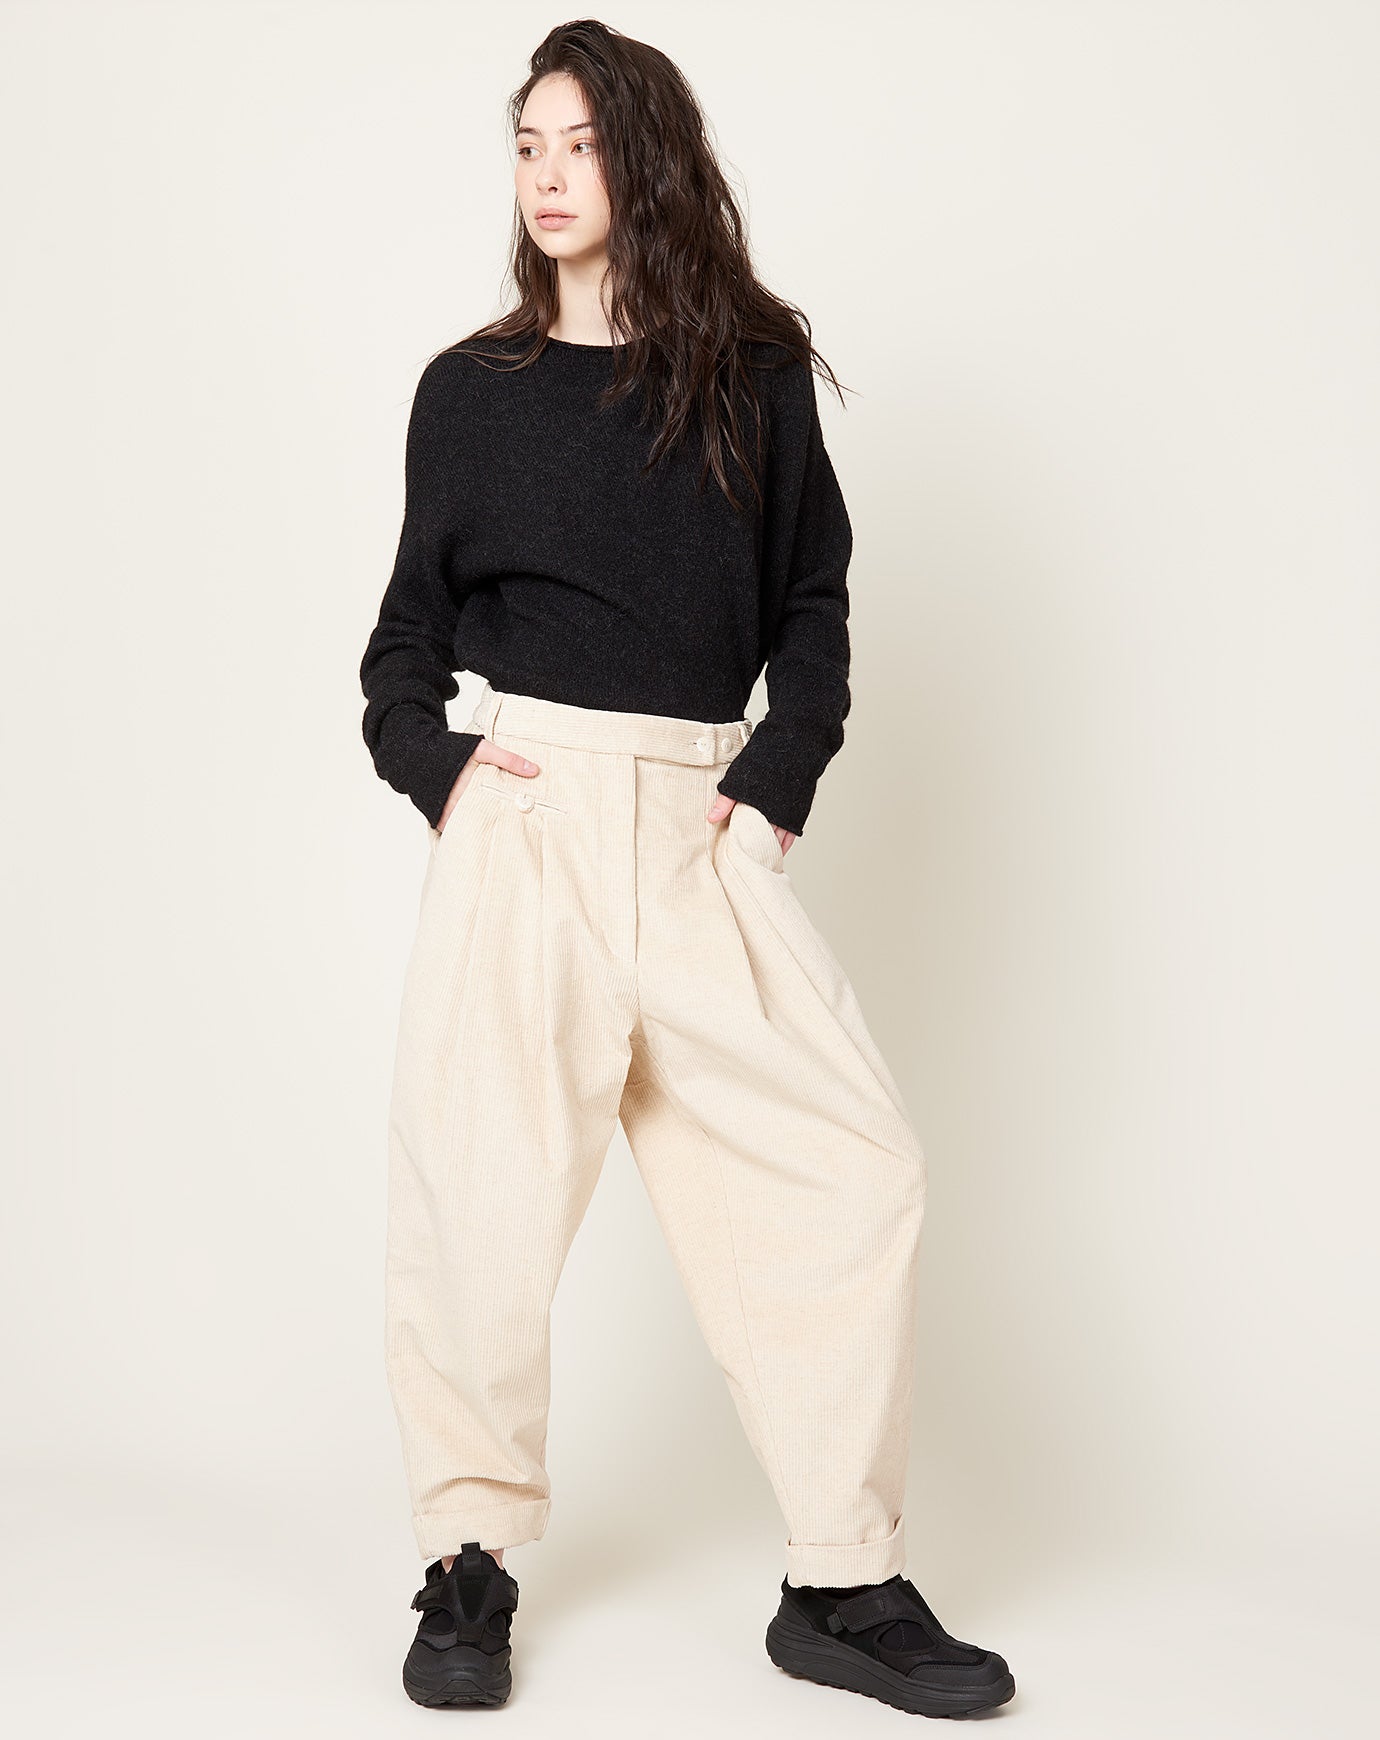 Soft Cotton Curved Pants Toasted Cordera